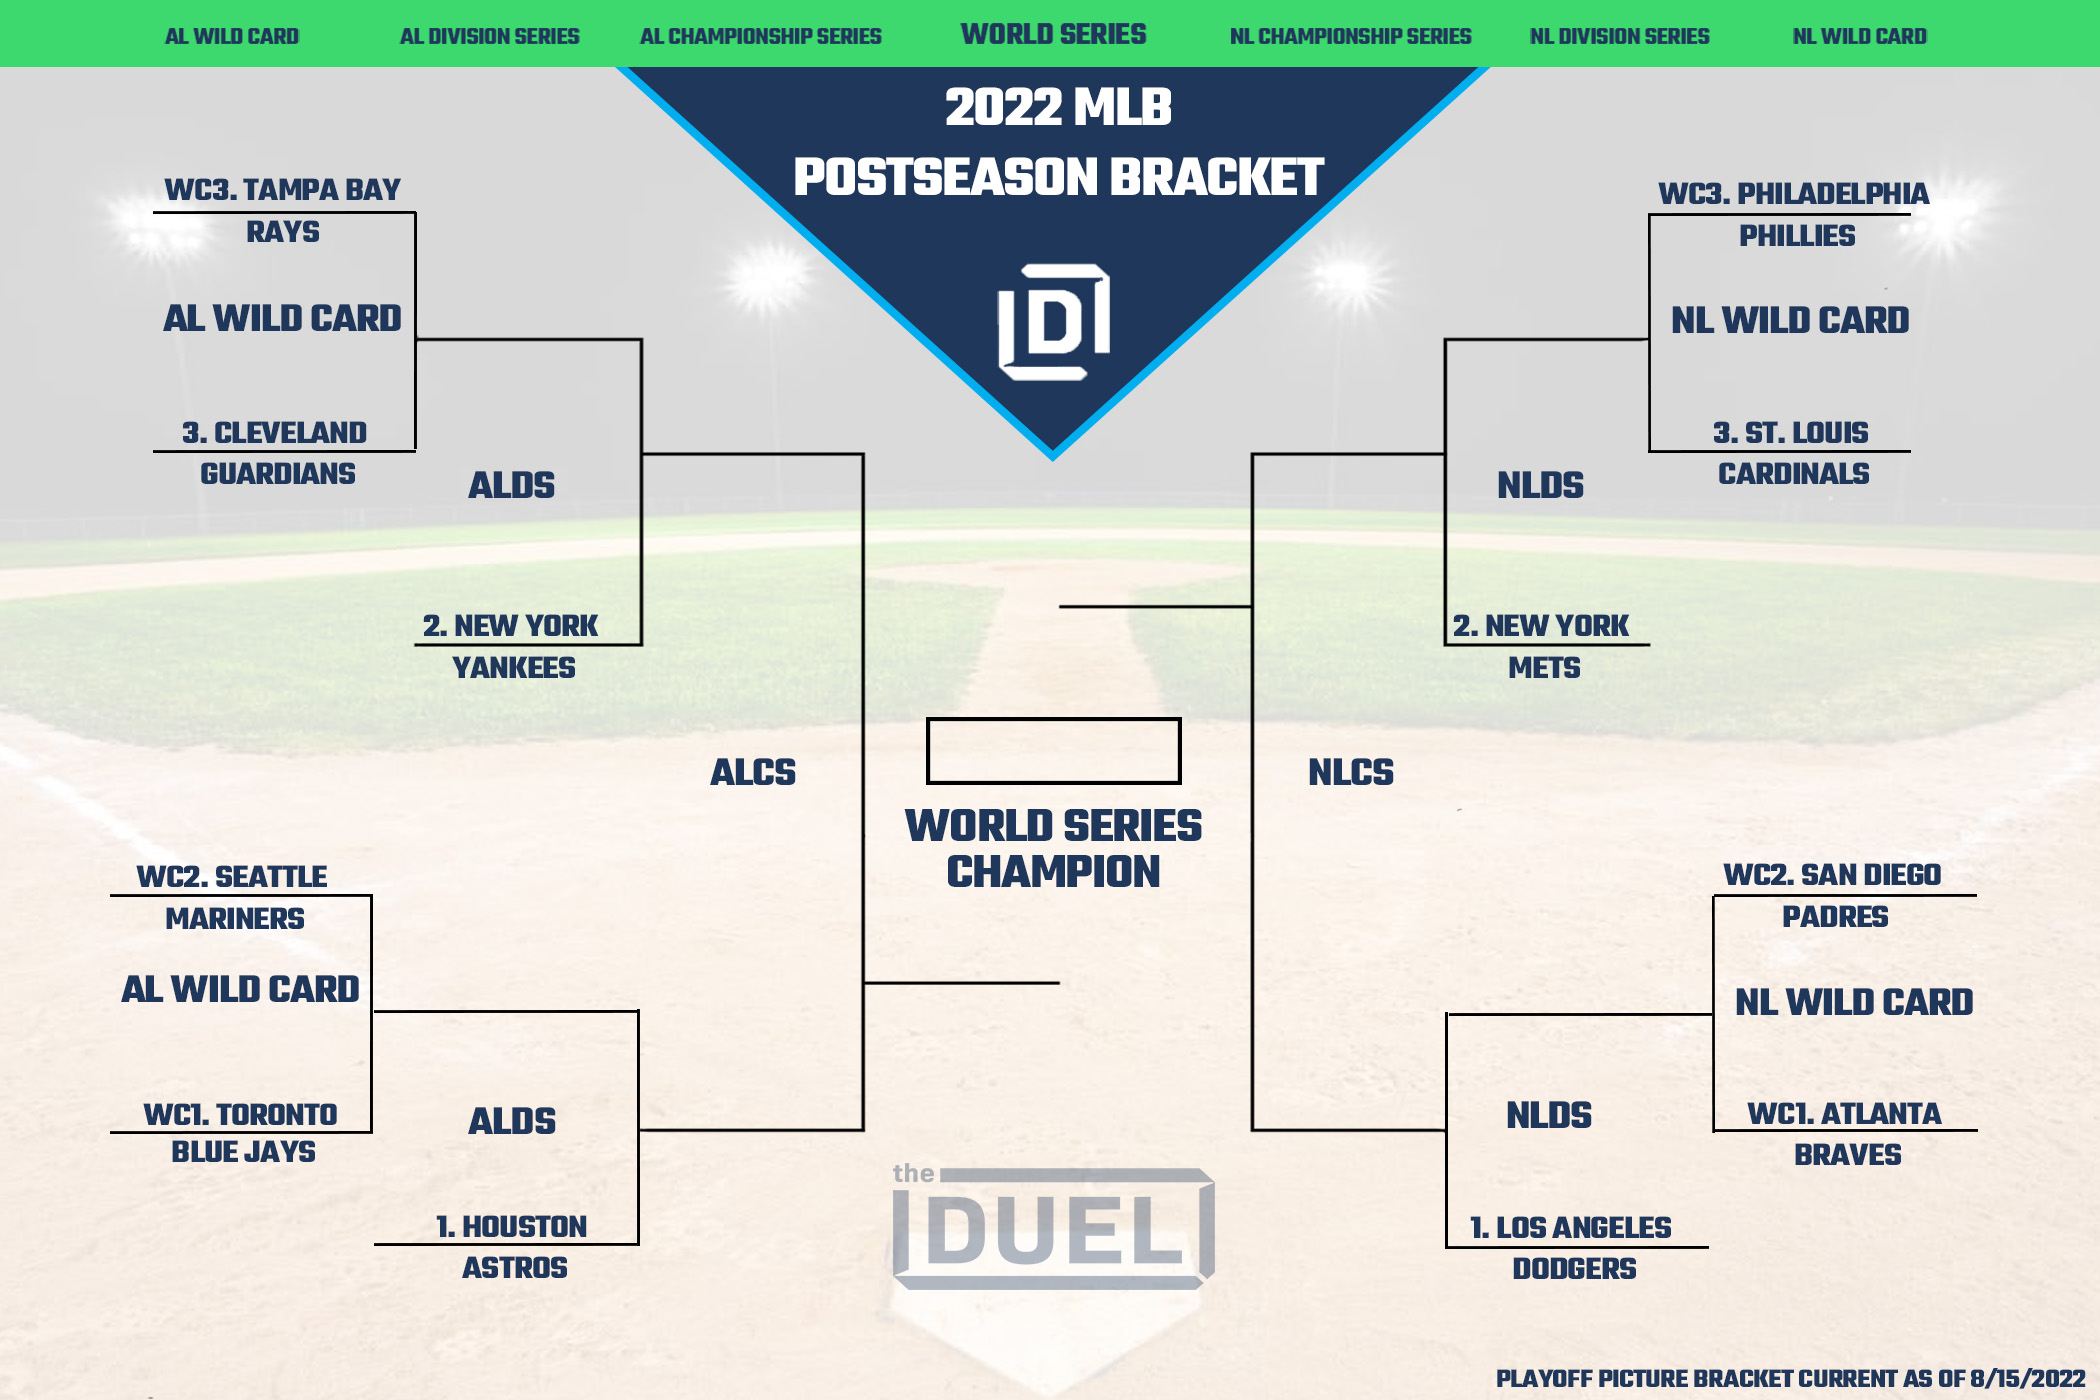 MLB Playoff Picture Bracket for the 2022 Postseason as of August